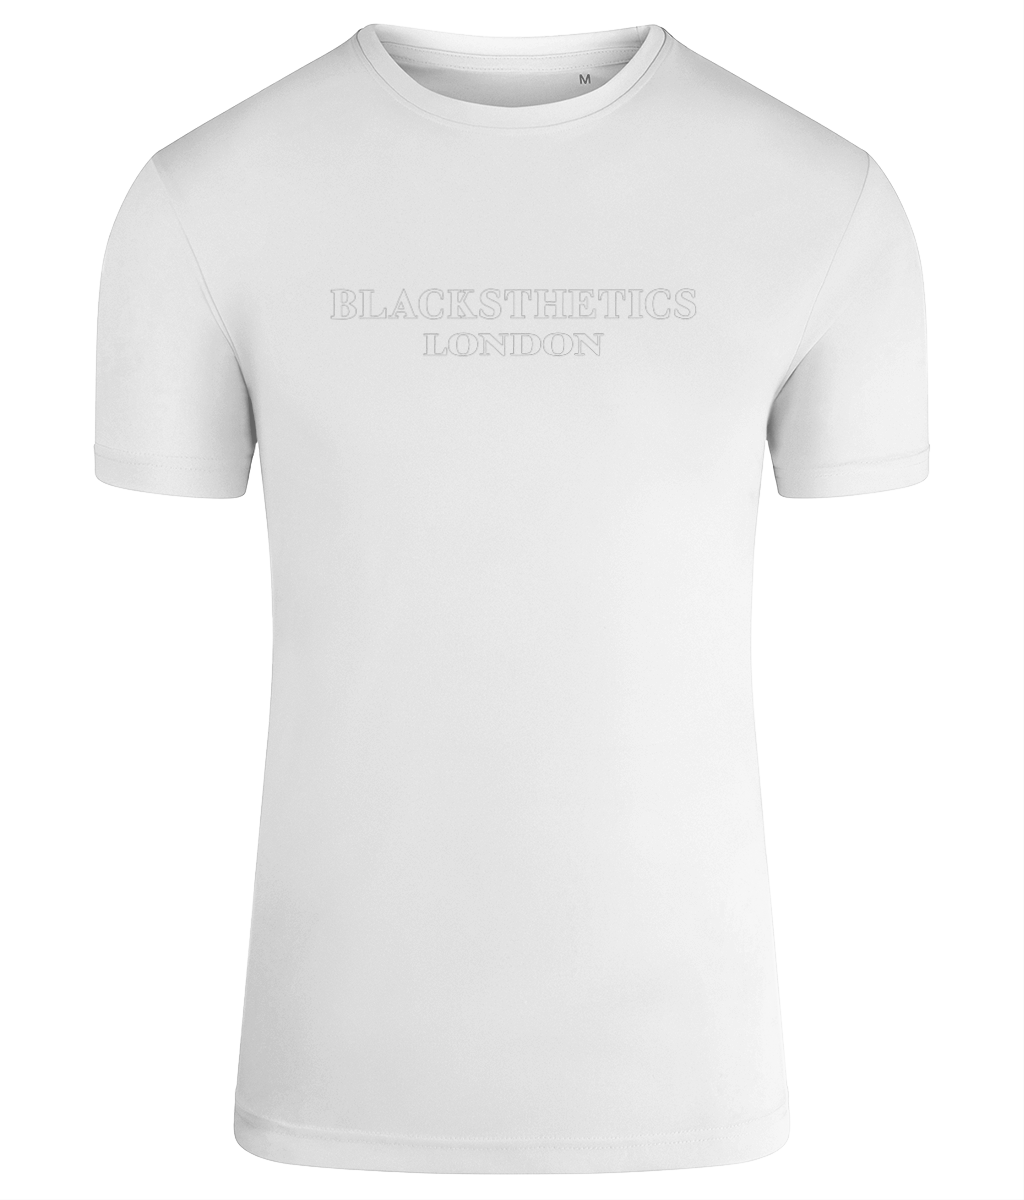 Recycled Performance T-shirt GYM Tee.